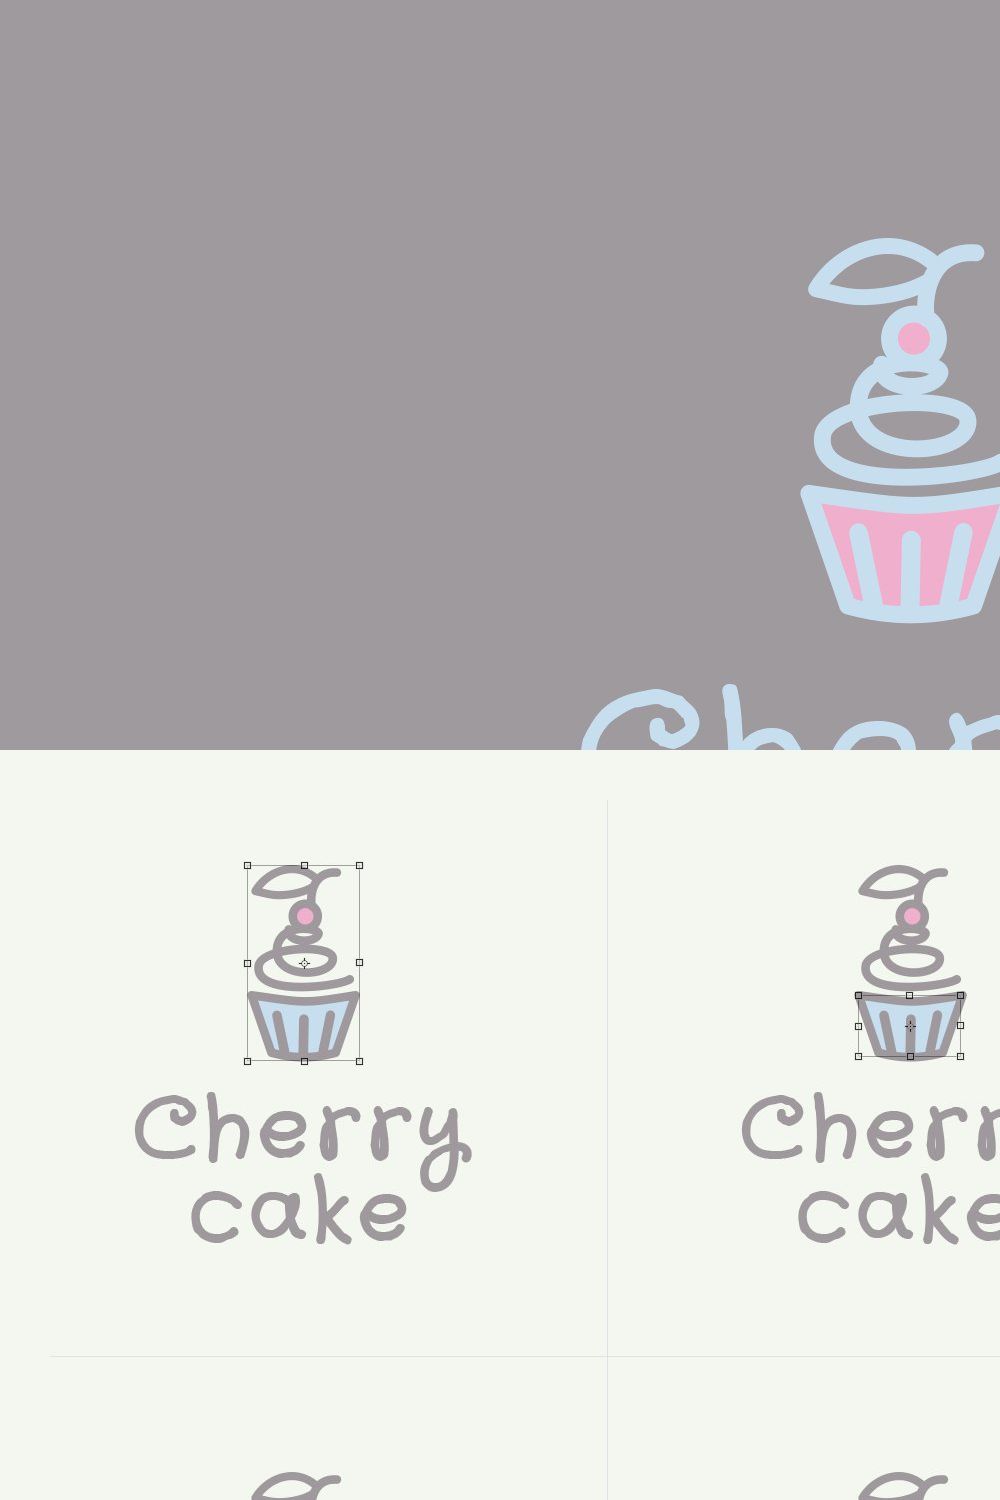 Cherry cake pinterest preview image.